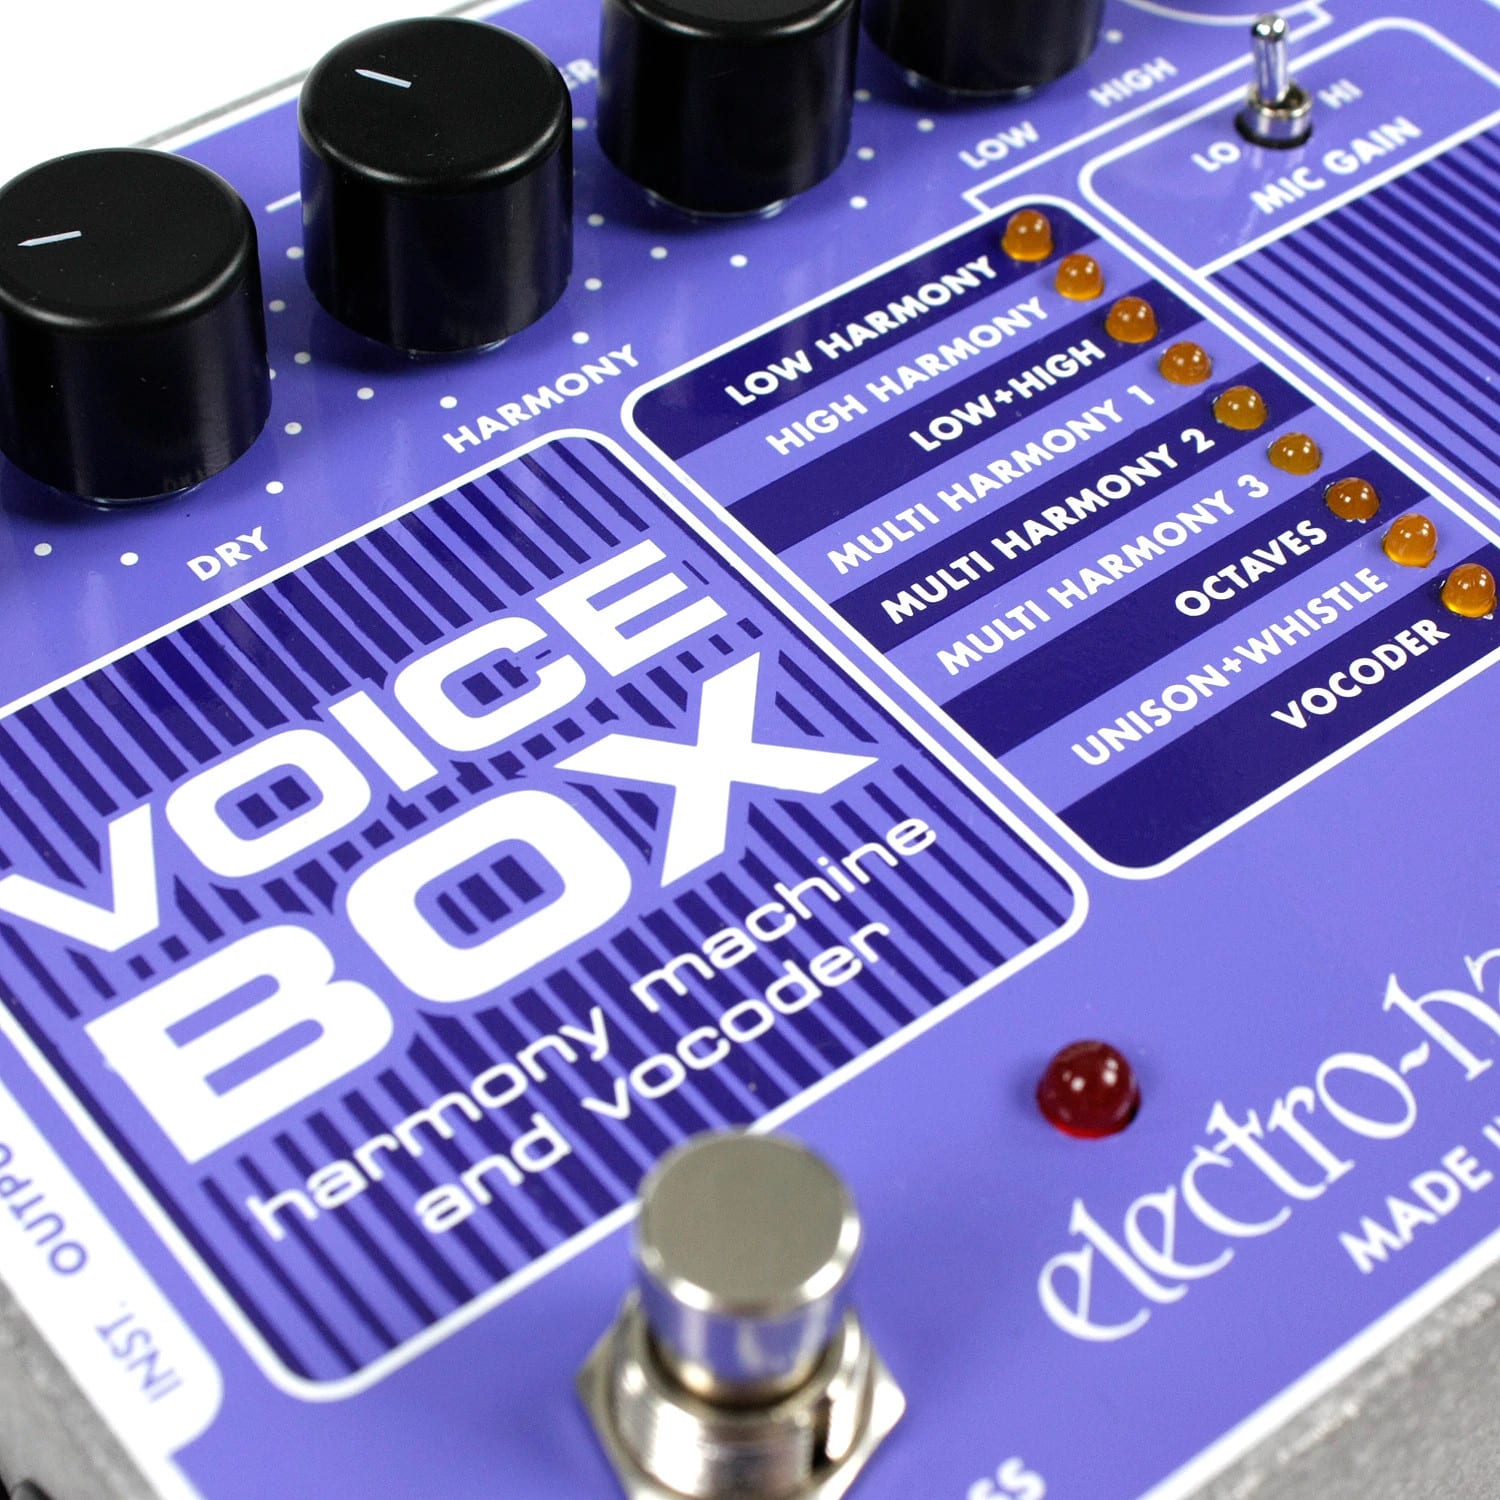 Enhancing Your Vocals with the EHX Voice Box